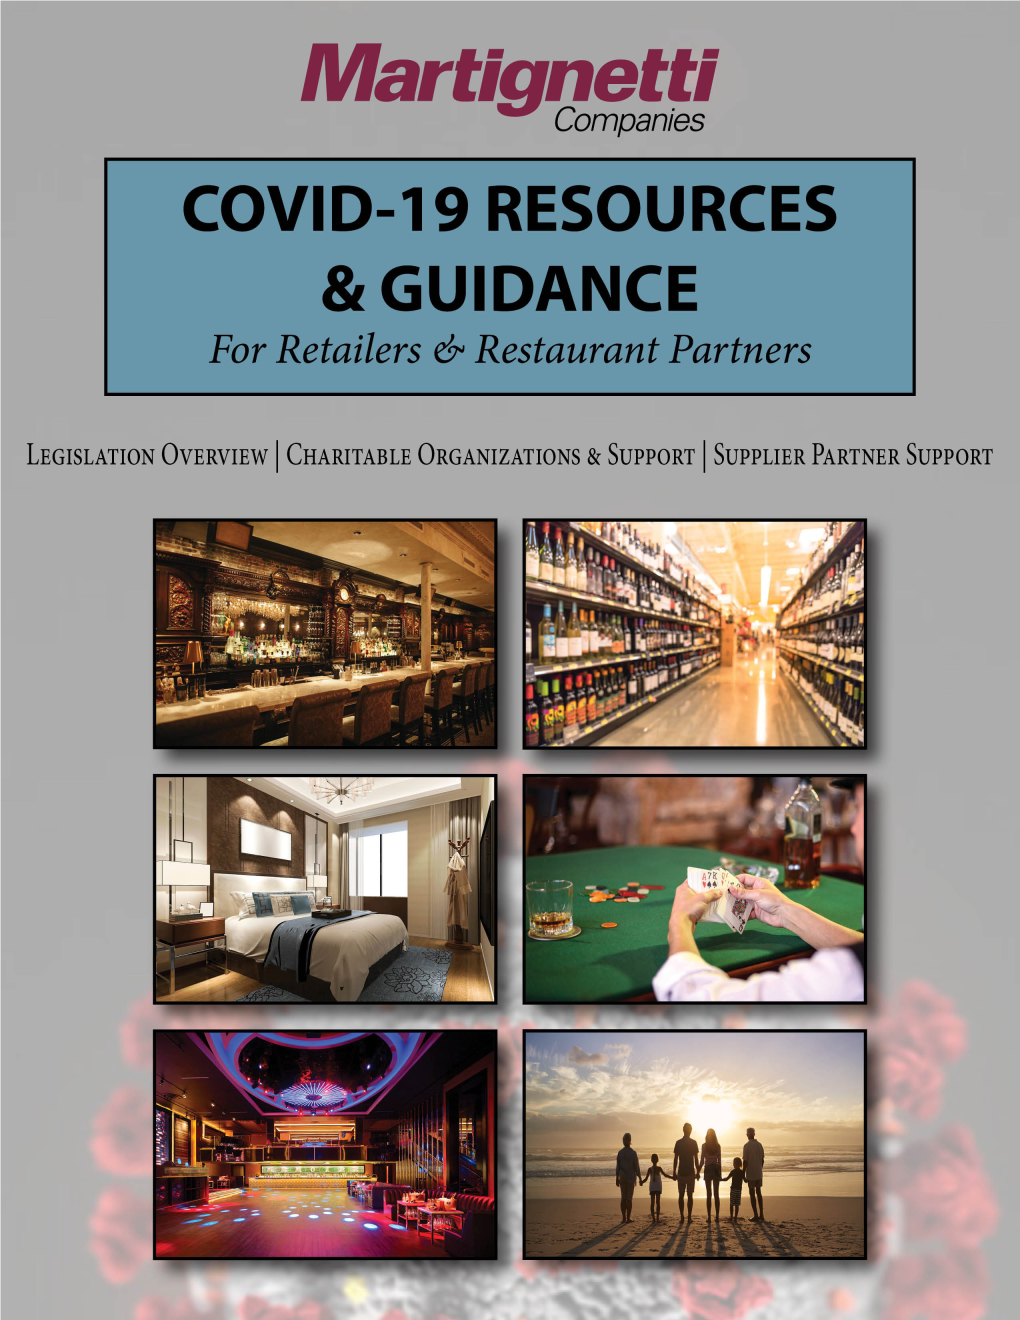 Covid-19 Resources & Guidance